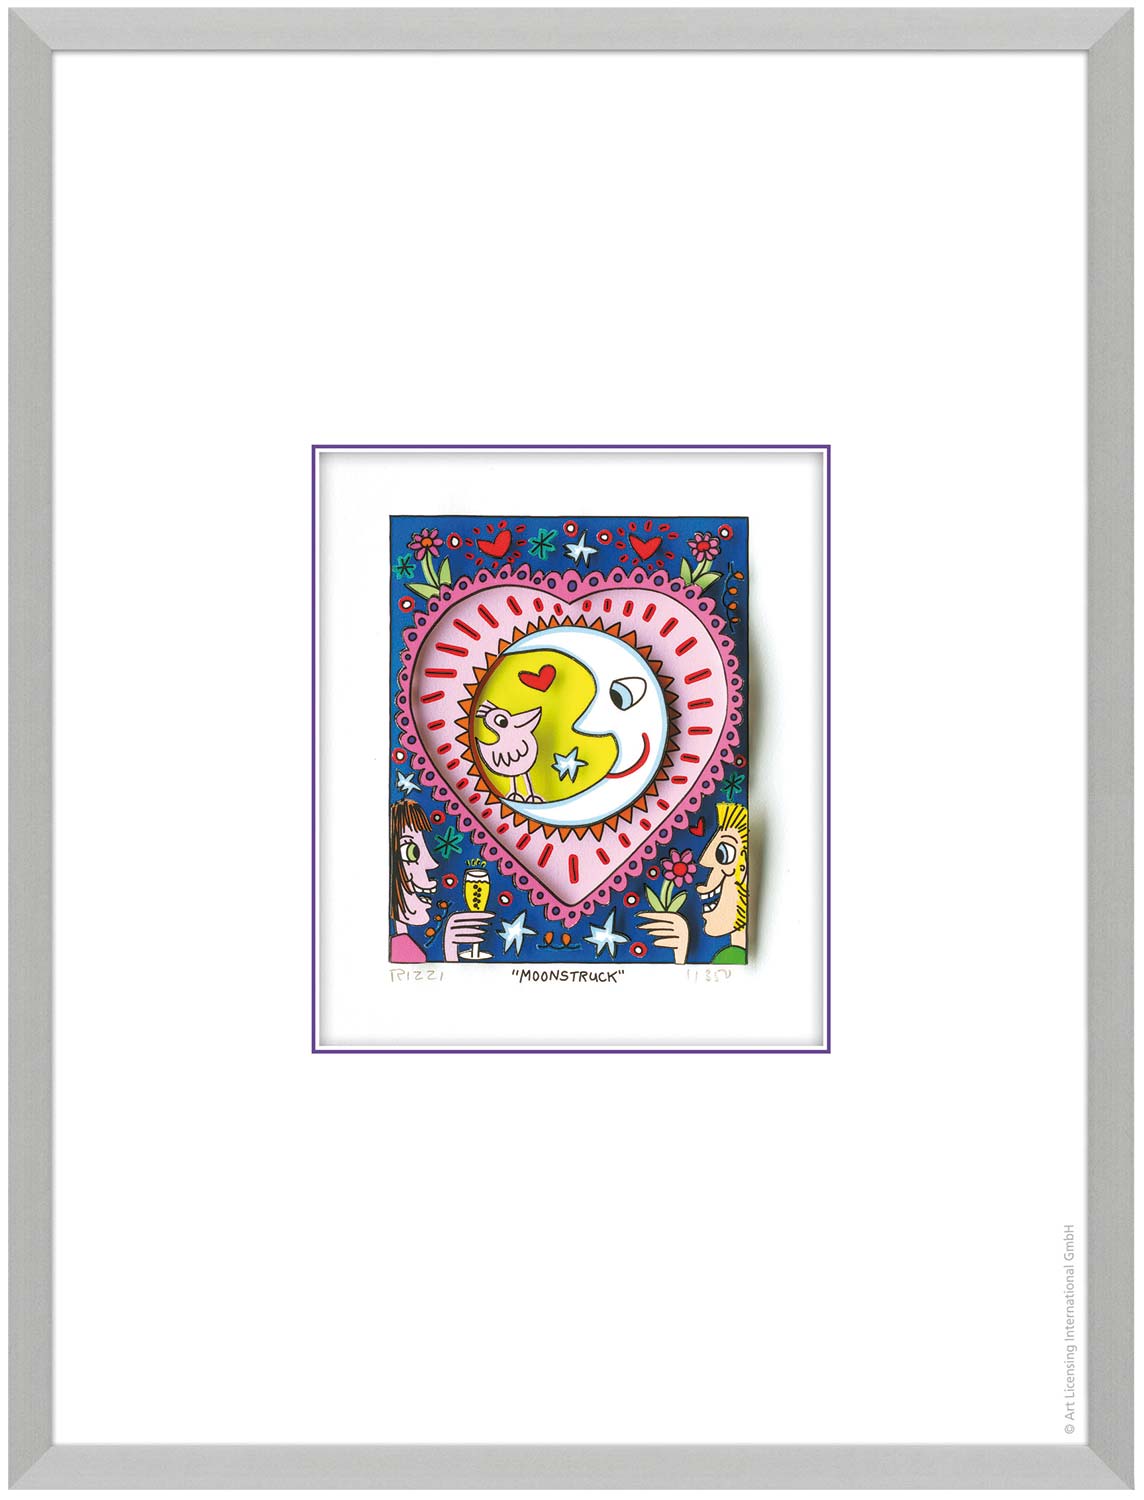 3D picture "Moonstruck", framed by James Rizzi